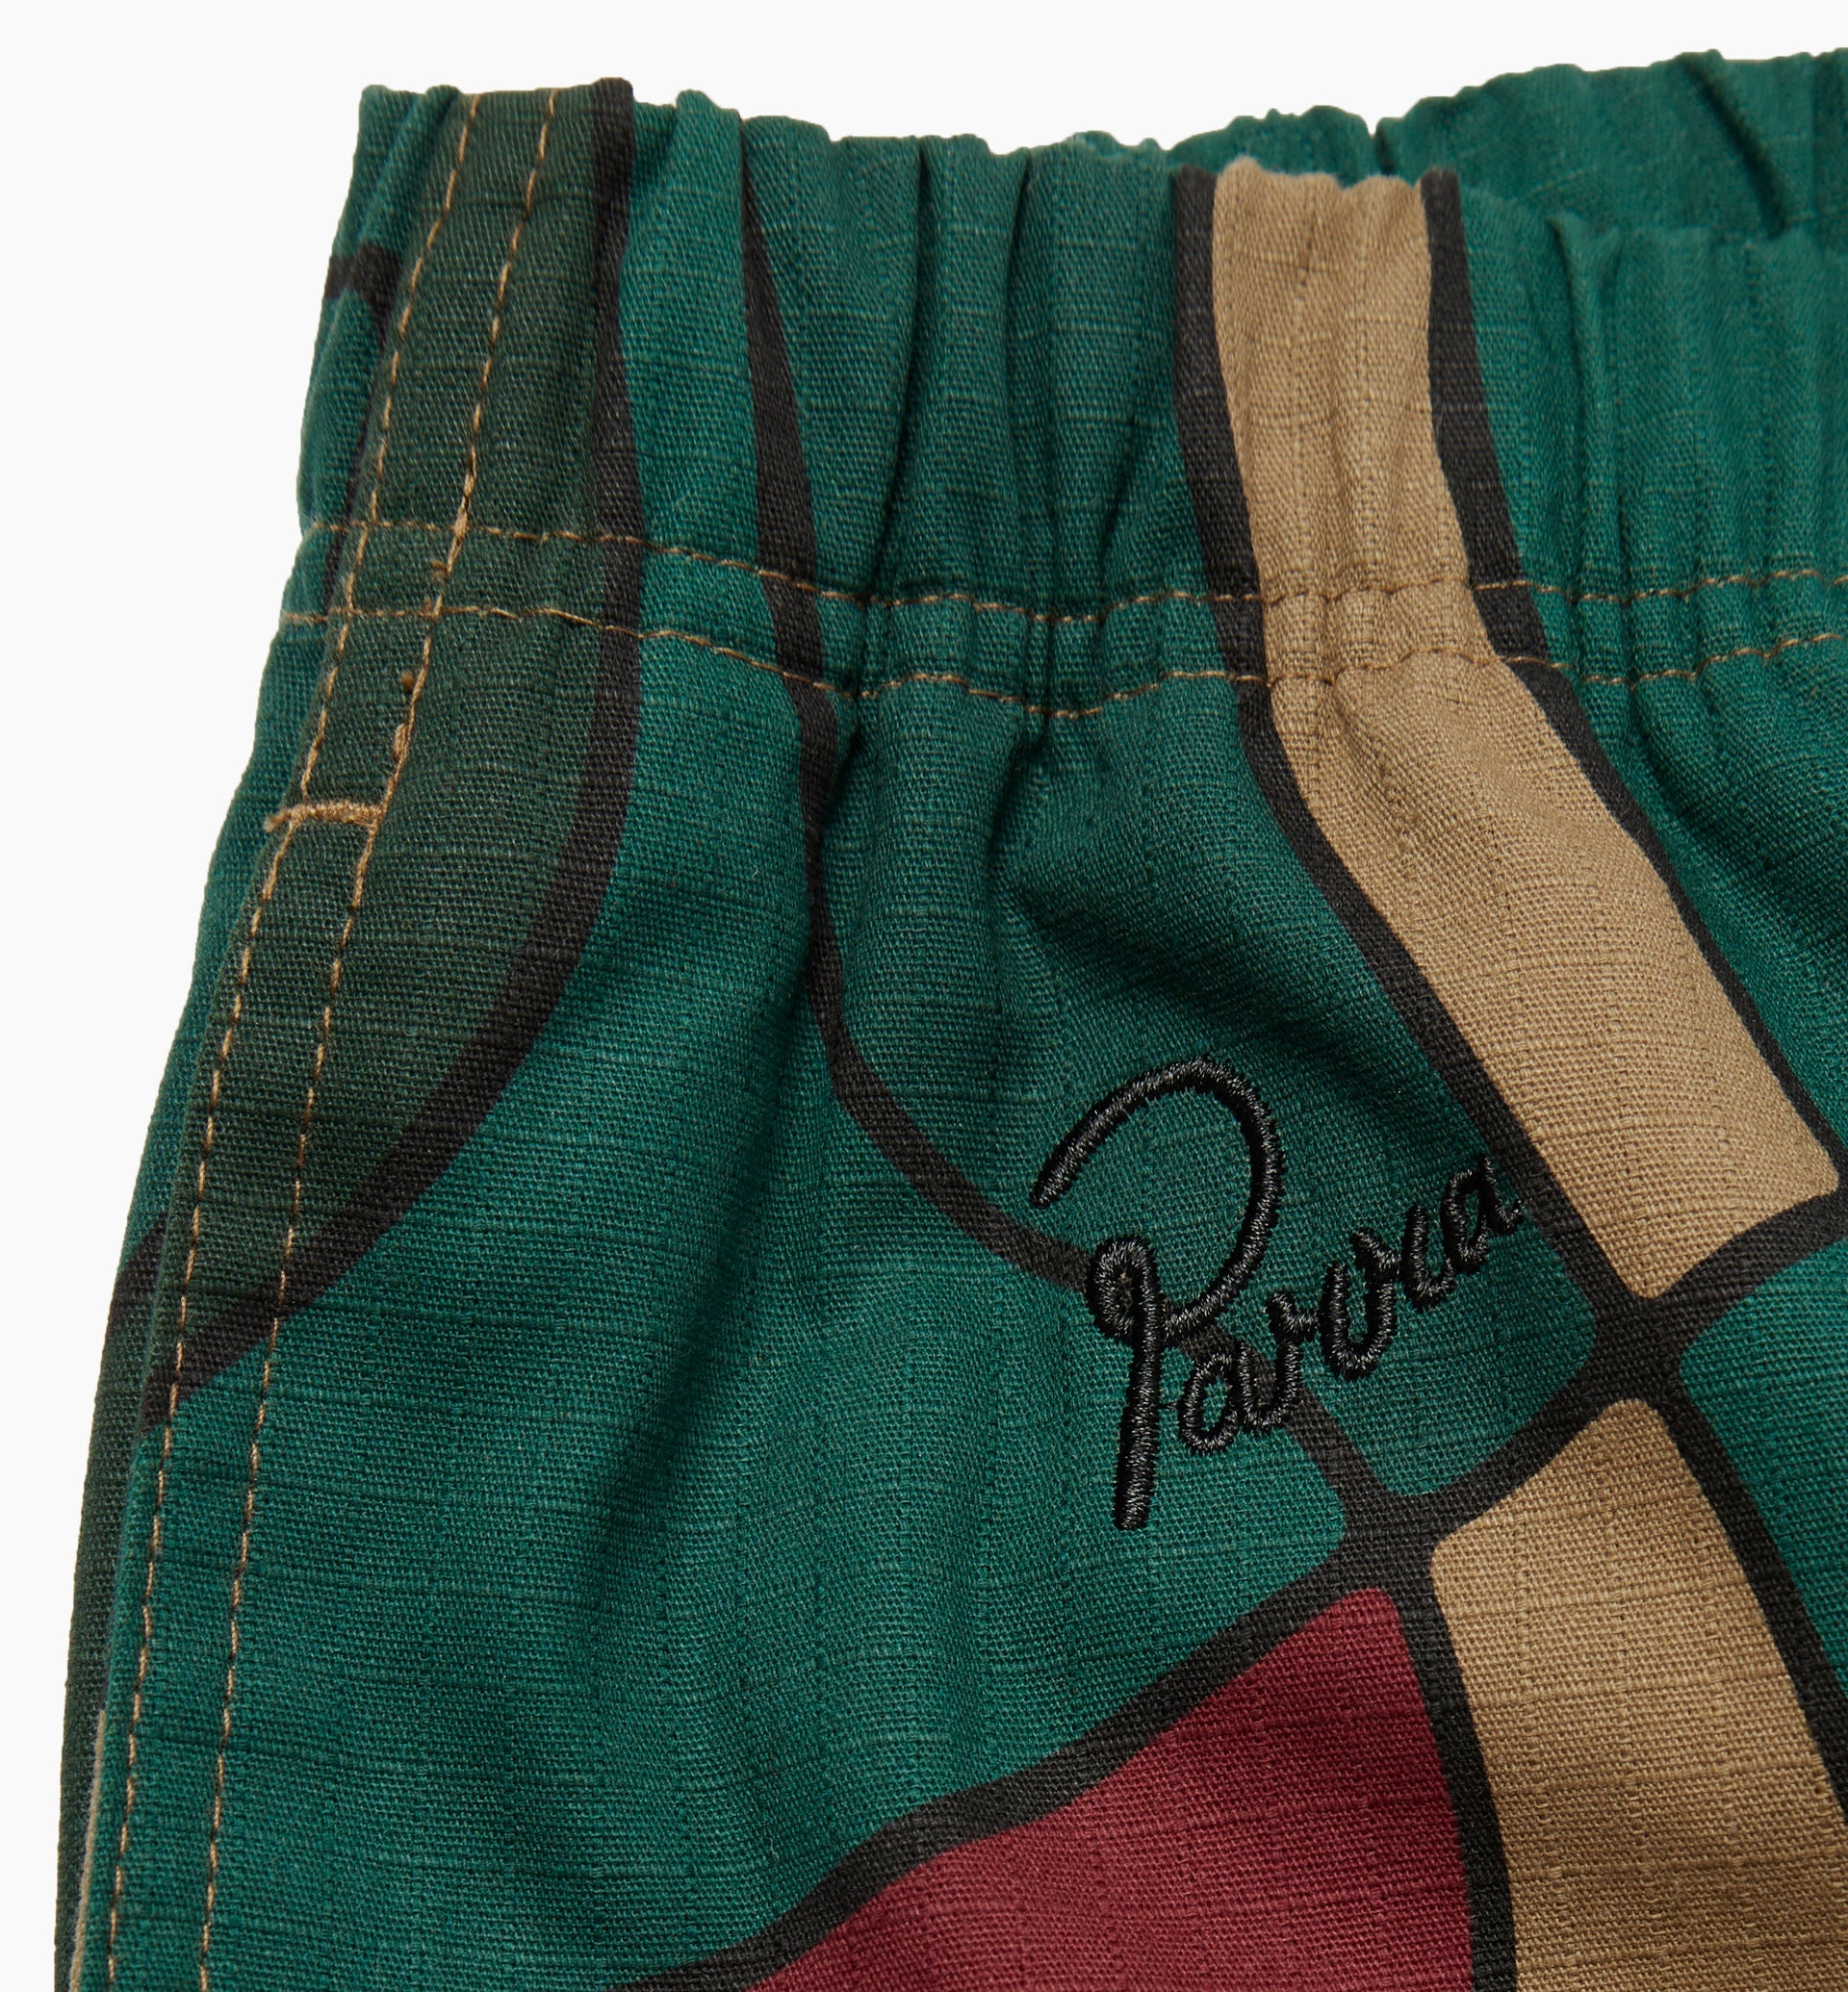 Parra - trees in wind relaxed pants